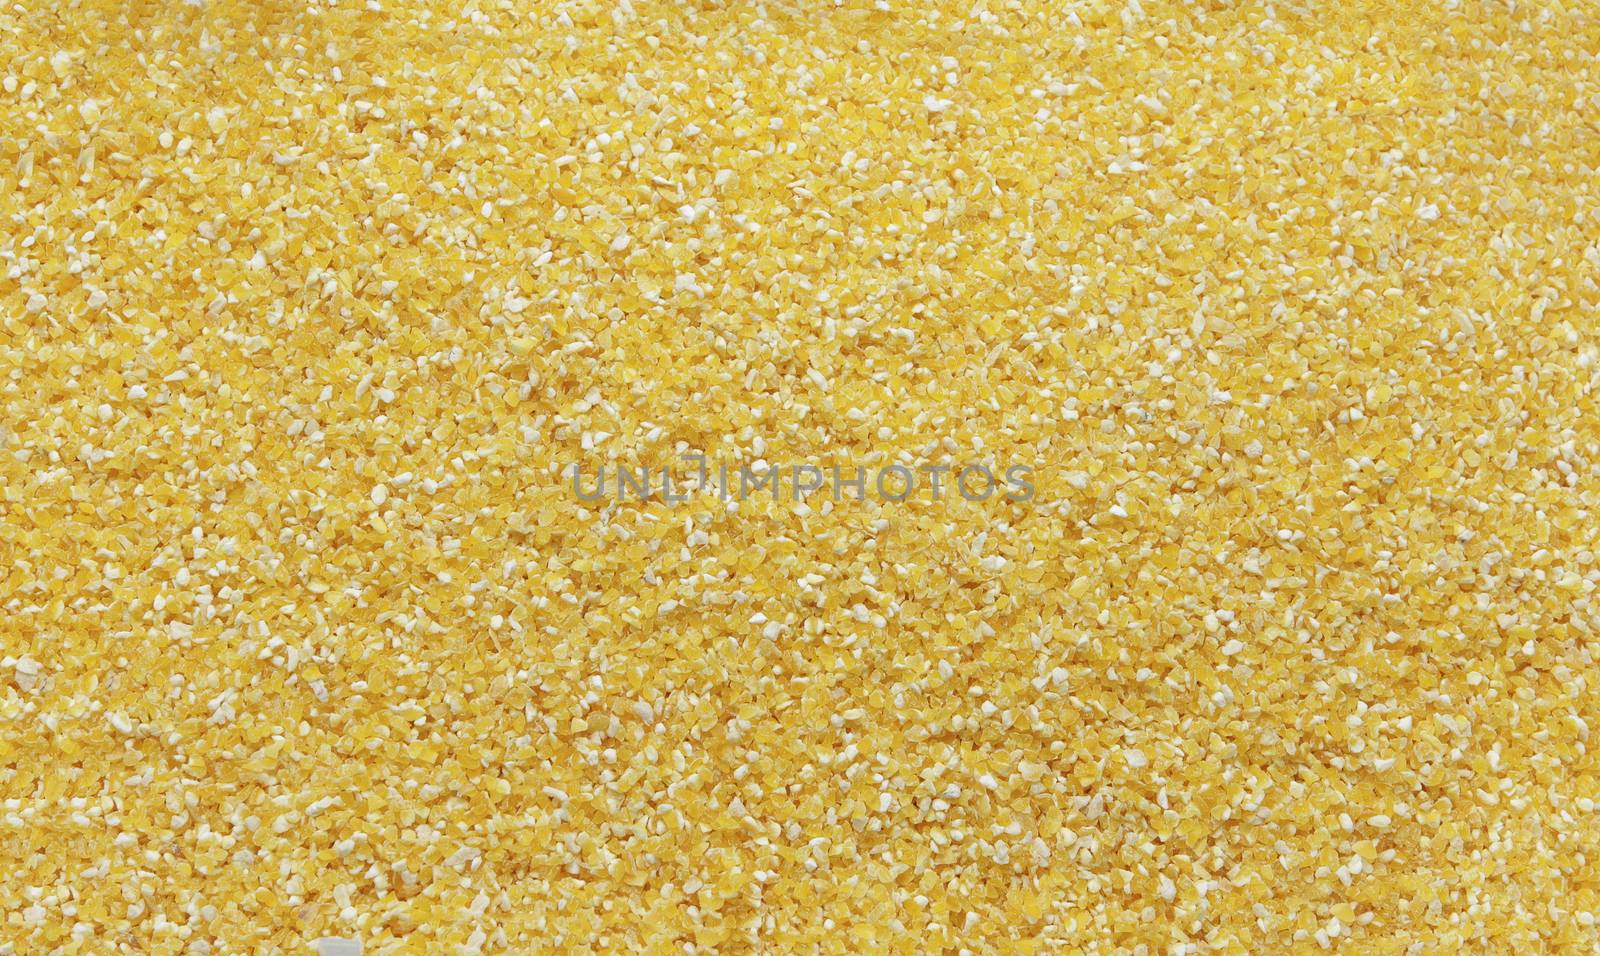 Corn groat -texture and details- traditional food, top view, closeup